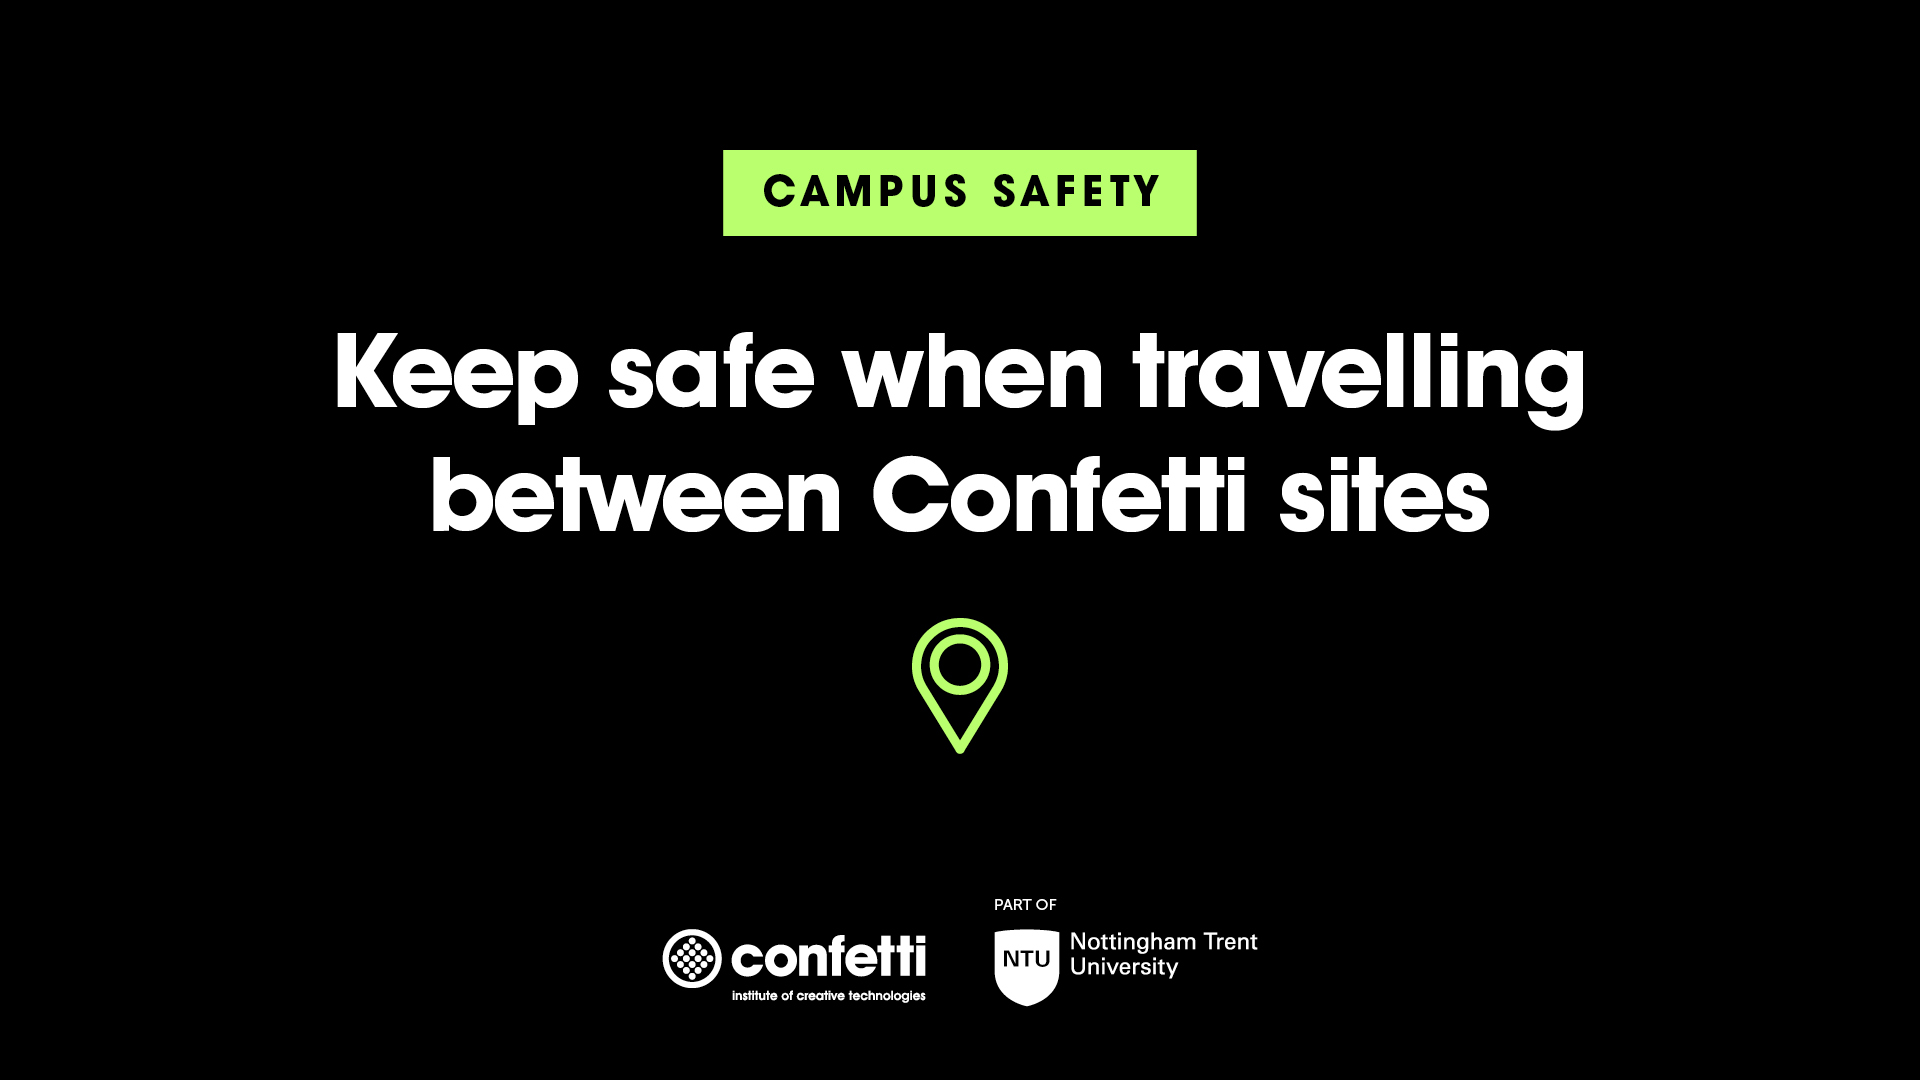 Confetti campus safety message